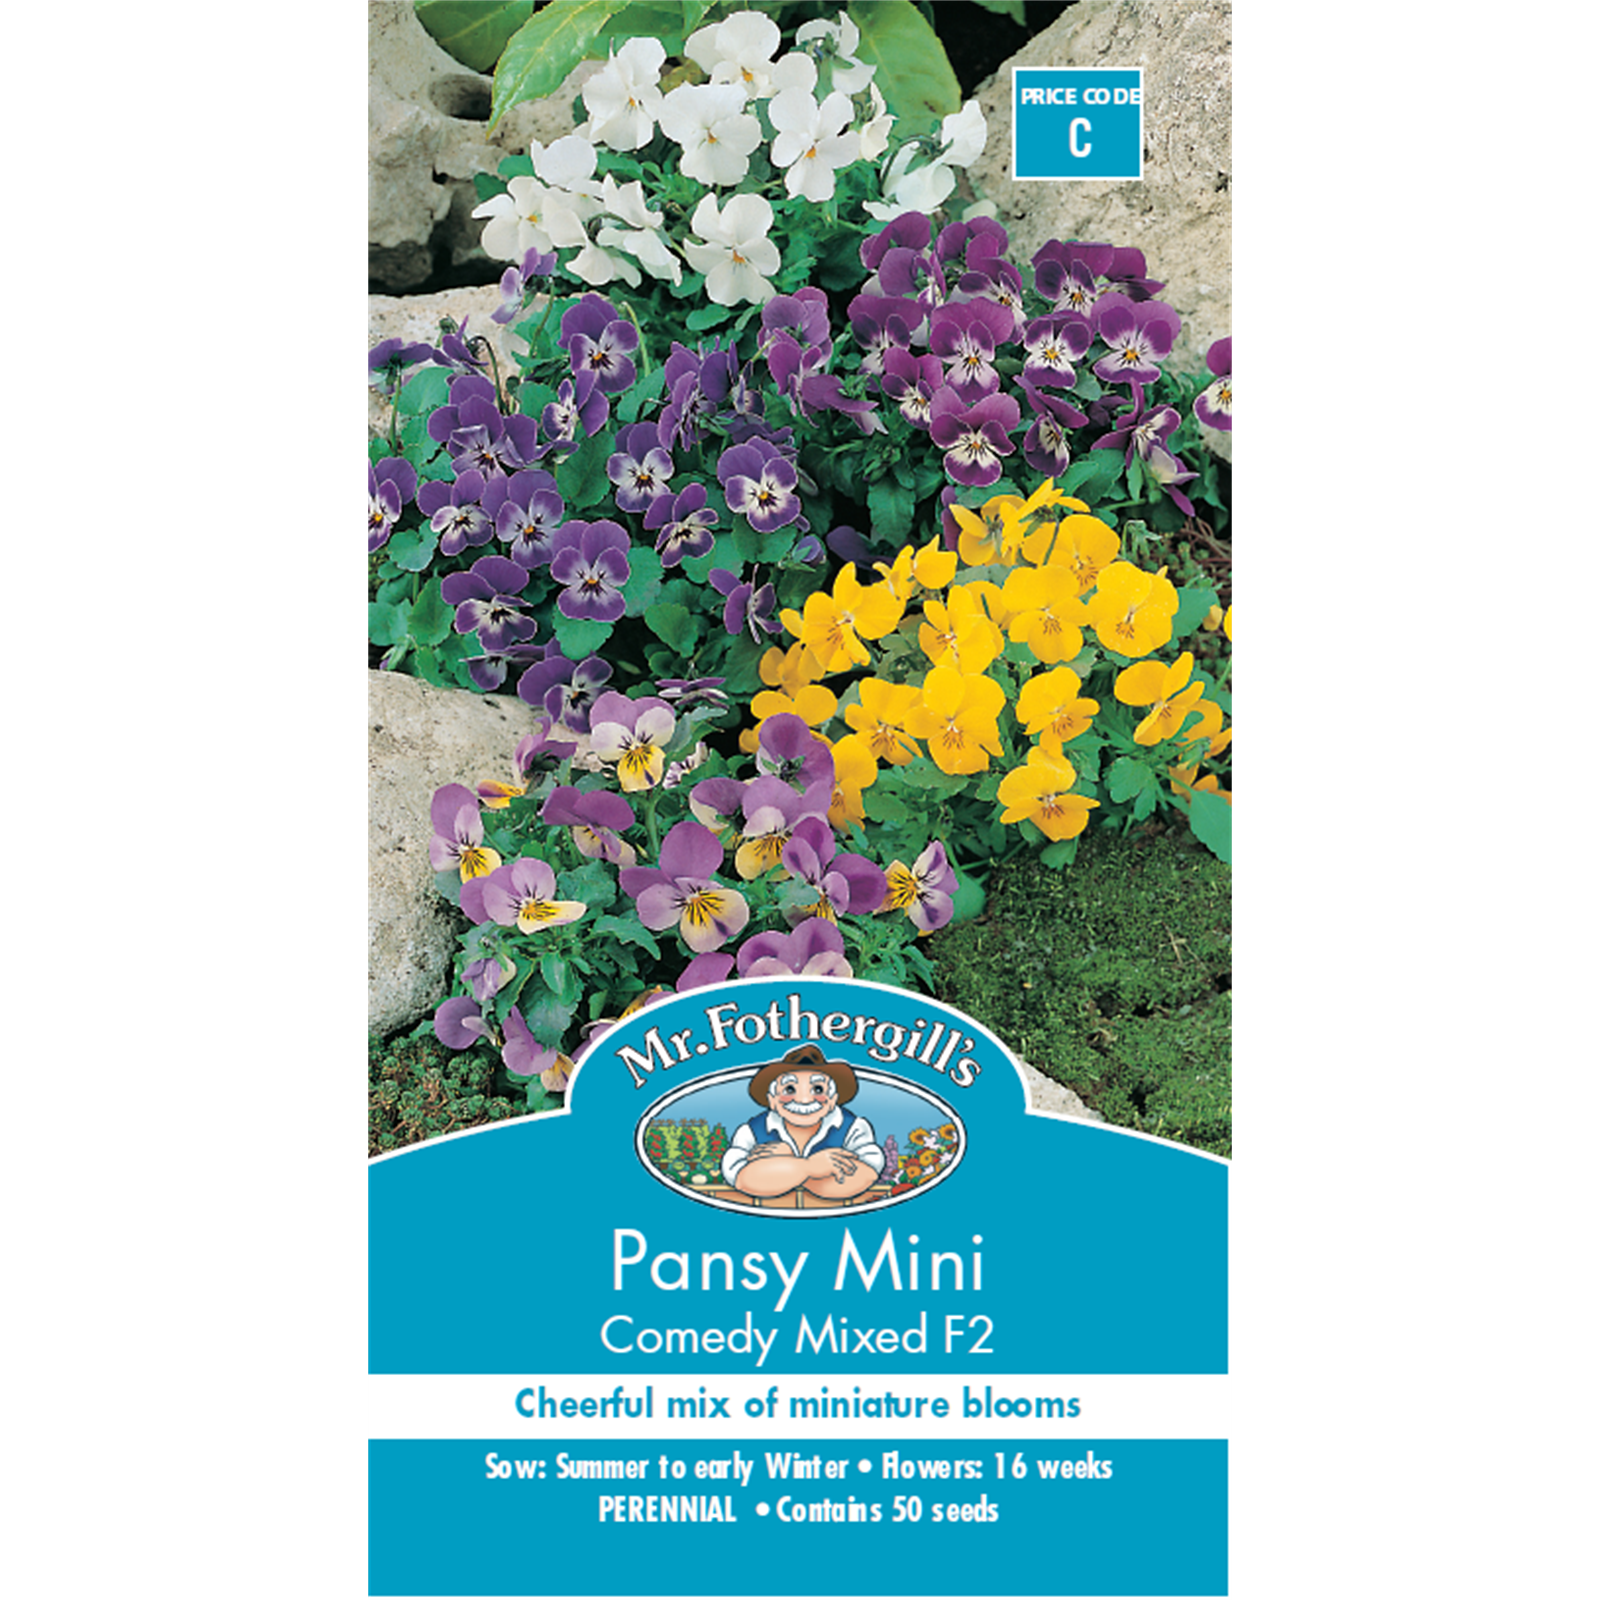 Mr Fothergill's Mini Pansy Flower Seeds